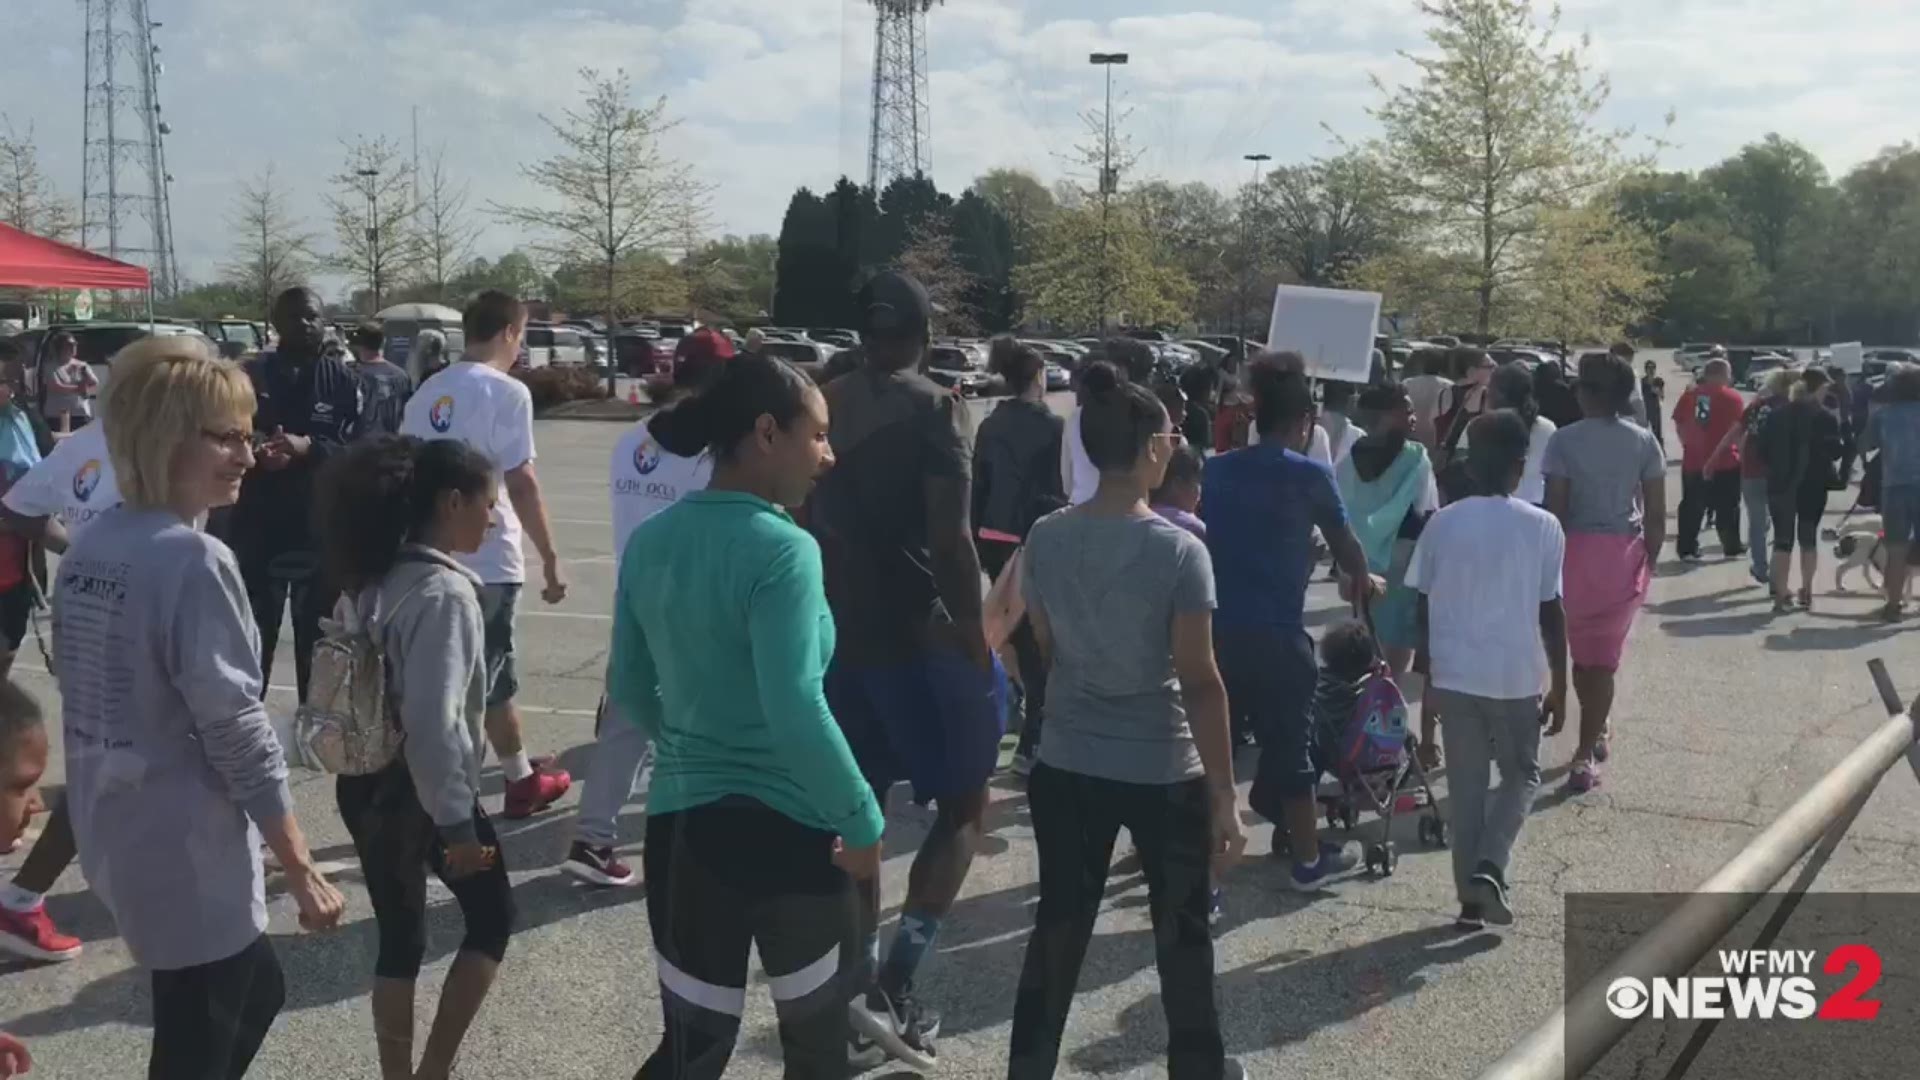 Saturday was a great day for the Human Race in Greensboro, which raises money for different charities each year.